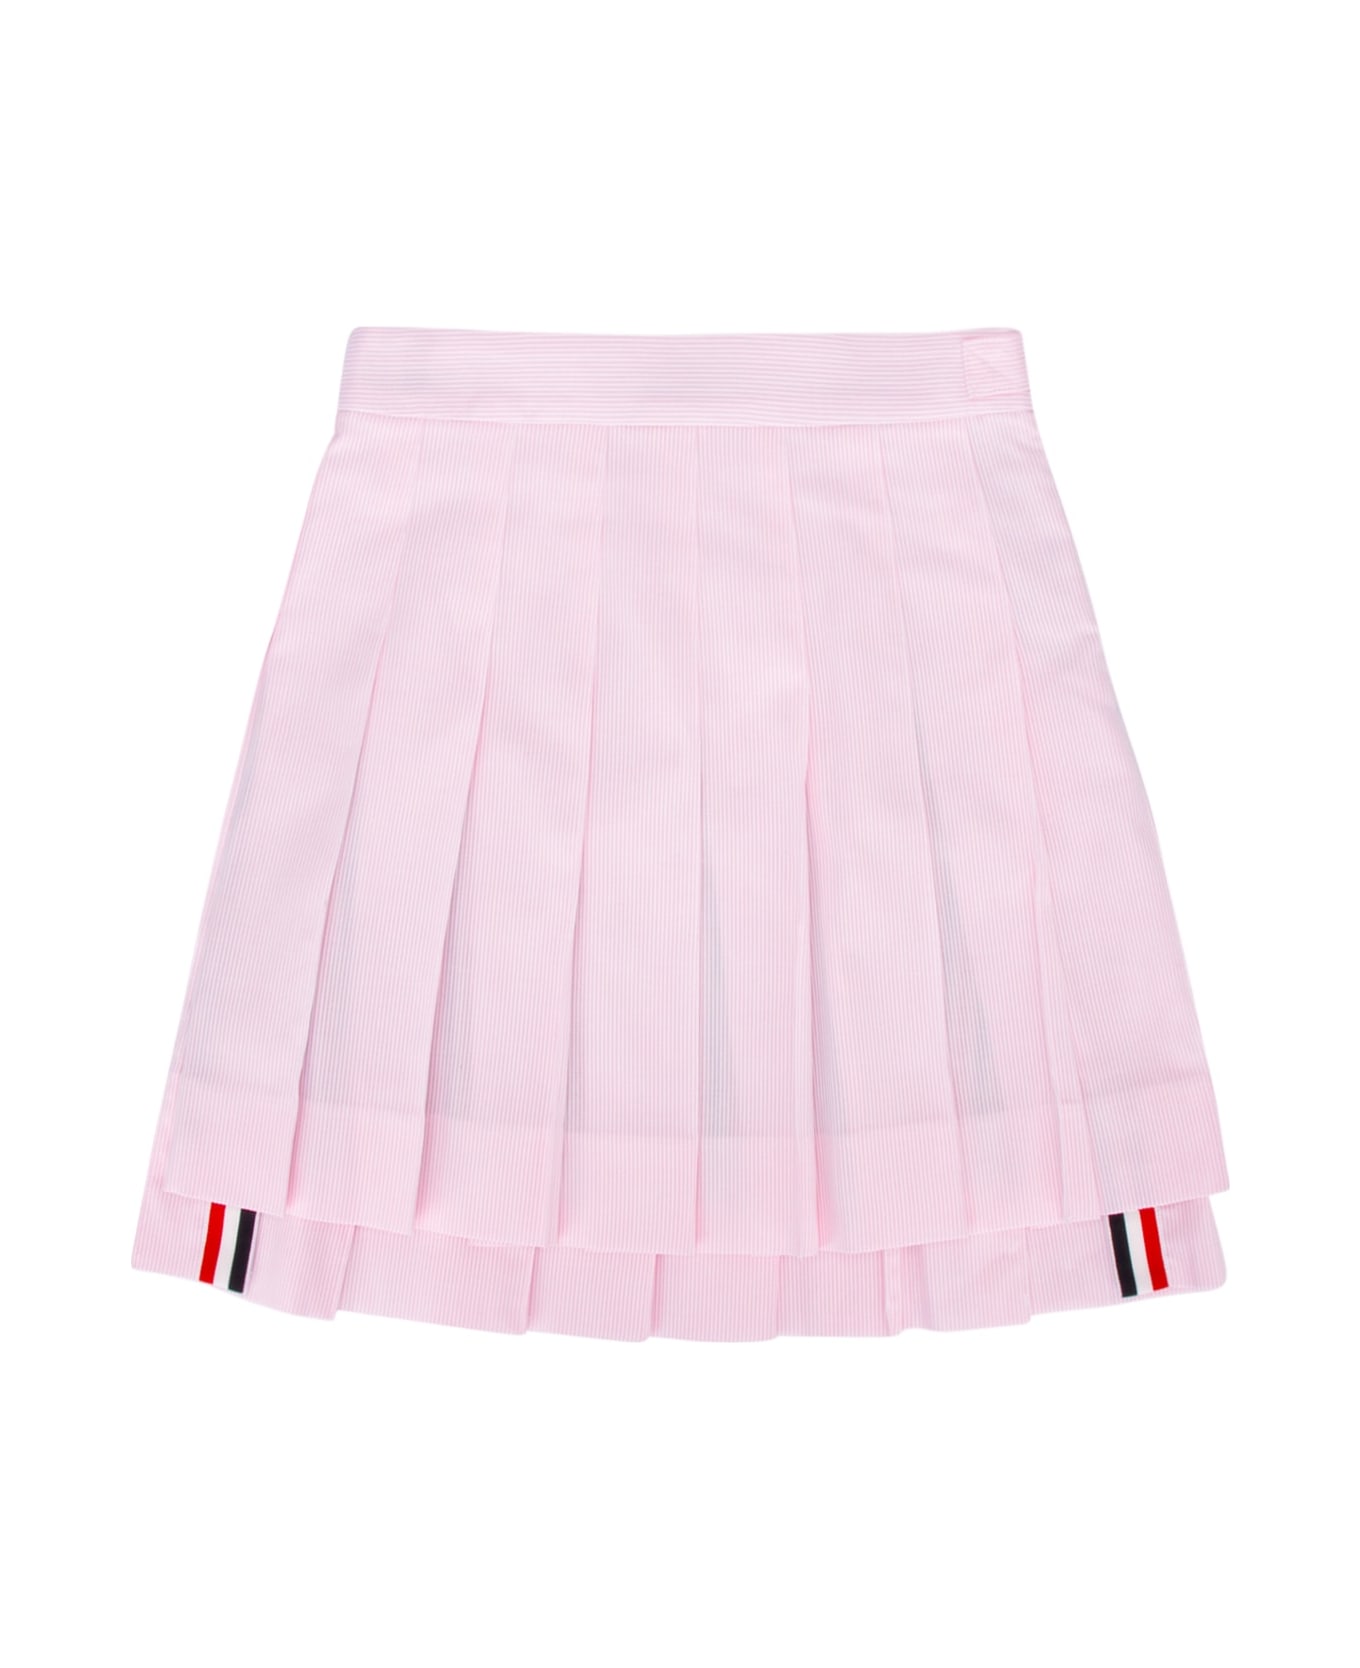 Thom Browne Gonna - LTPINK ボトムス